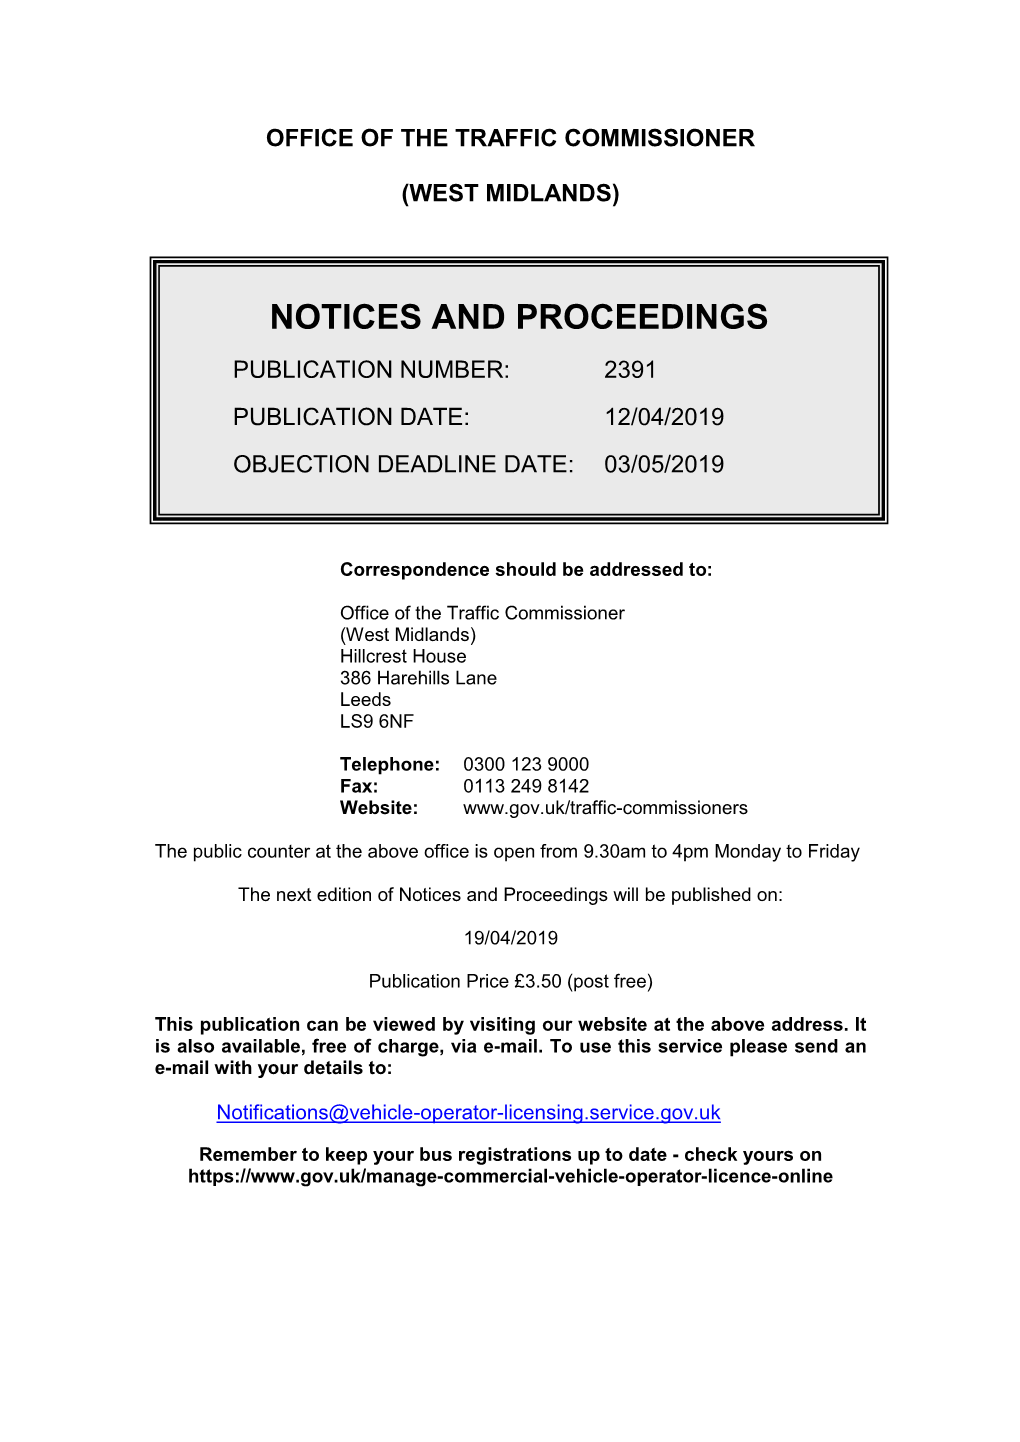 Notices and Proceedings for West Midlands